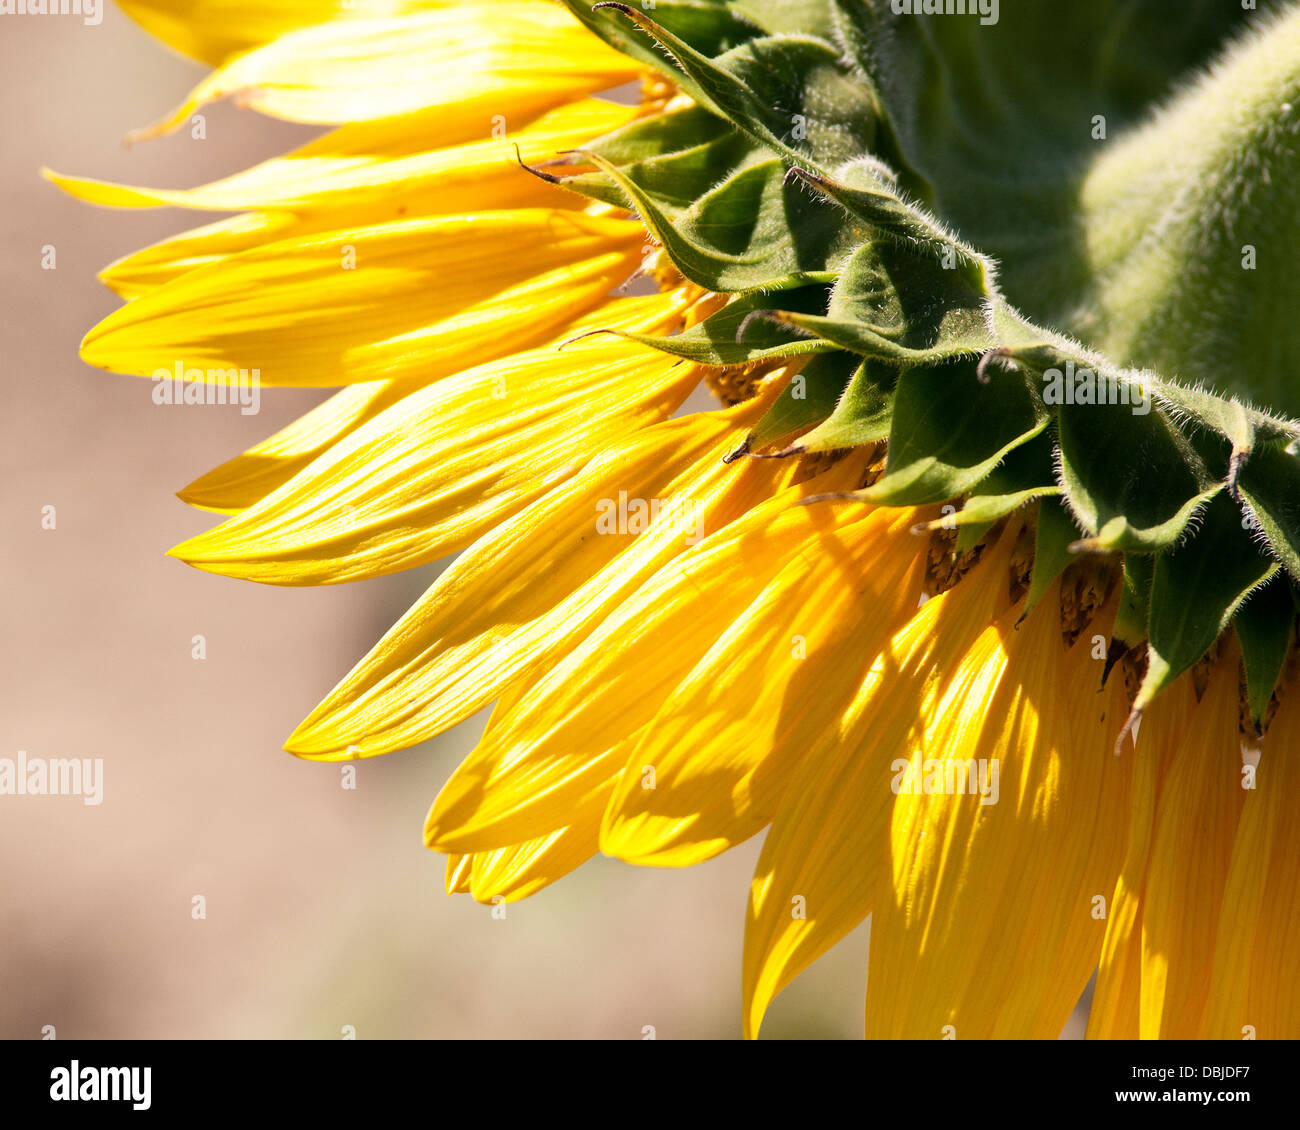 Close-up of the back of a yellow sunflower Stock Photo